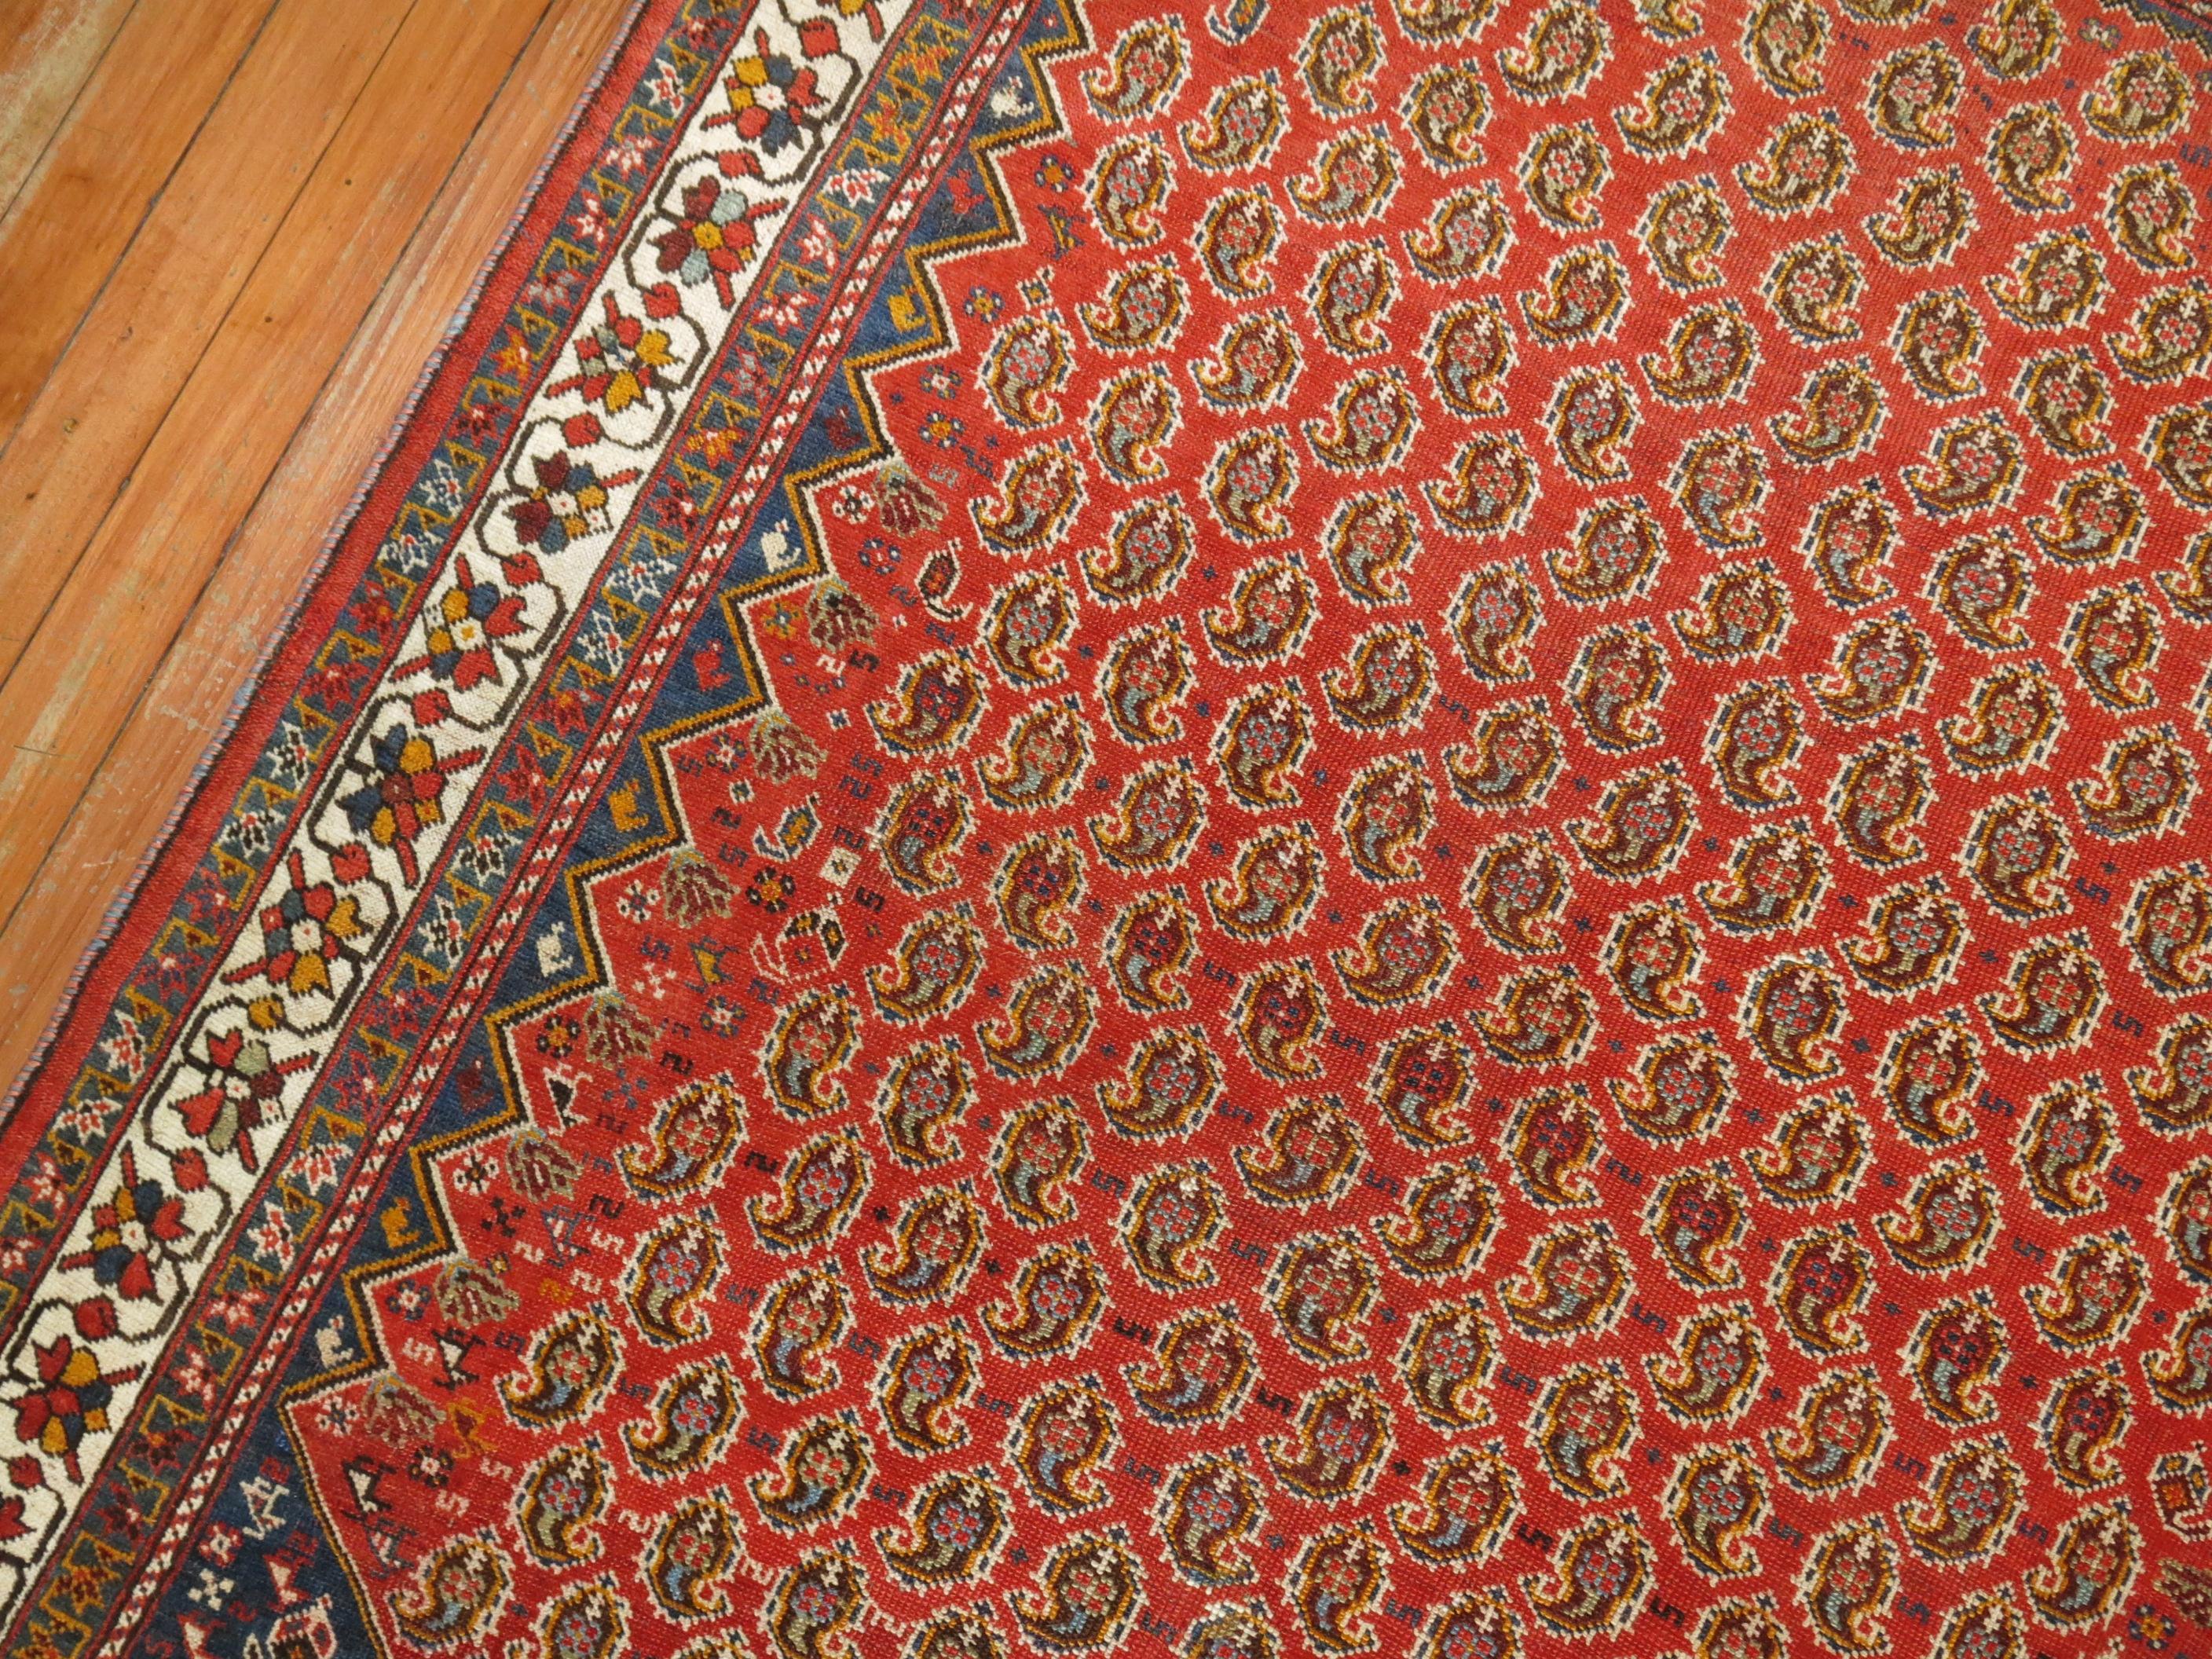 Antique Tribal Persian Rug, Red Ground, Blue Corner, Ivory Border In Good Condition For Sale In New York, NY